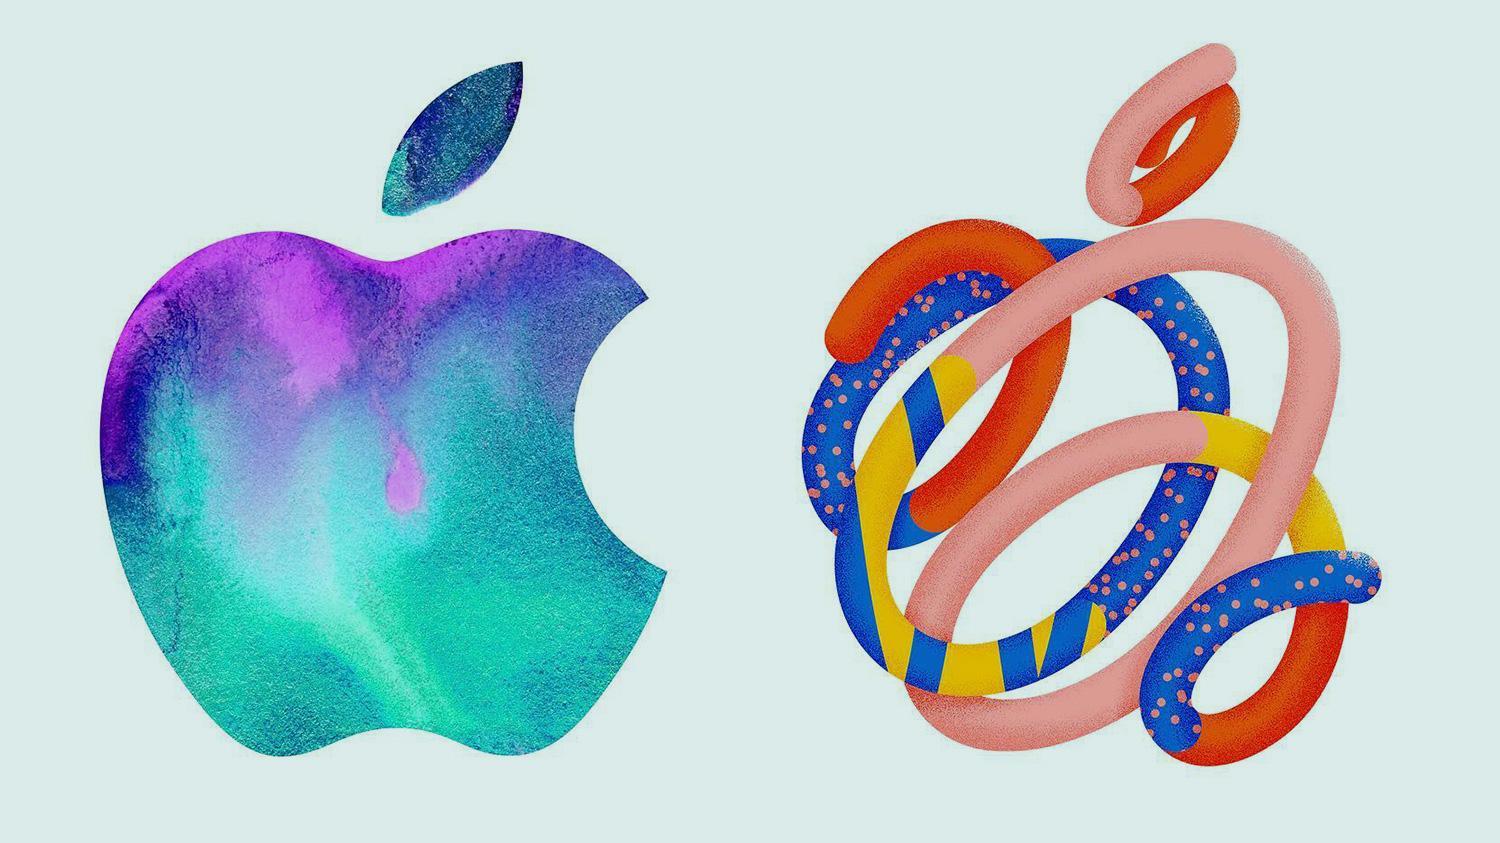 All Apple Logo - These artists reimagined the Apple logo for the new iPad Pro launch ...